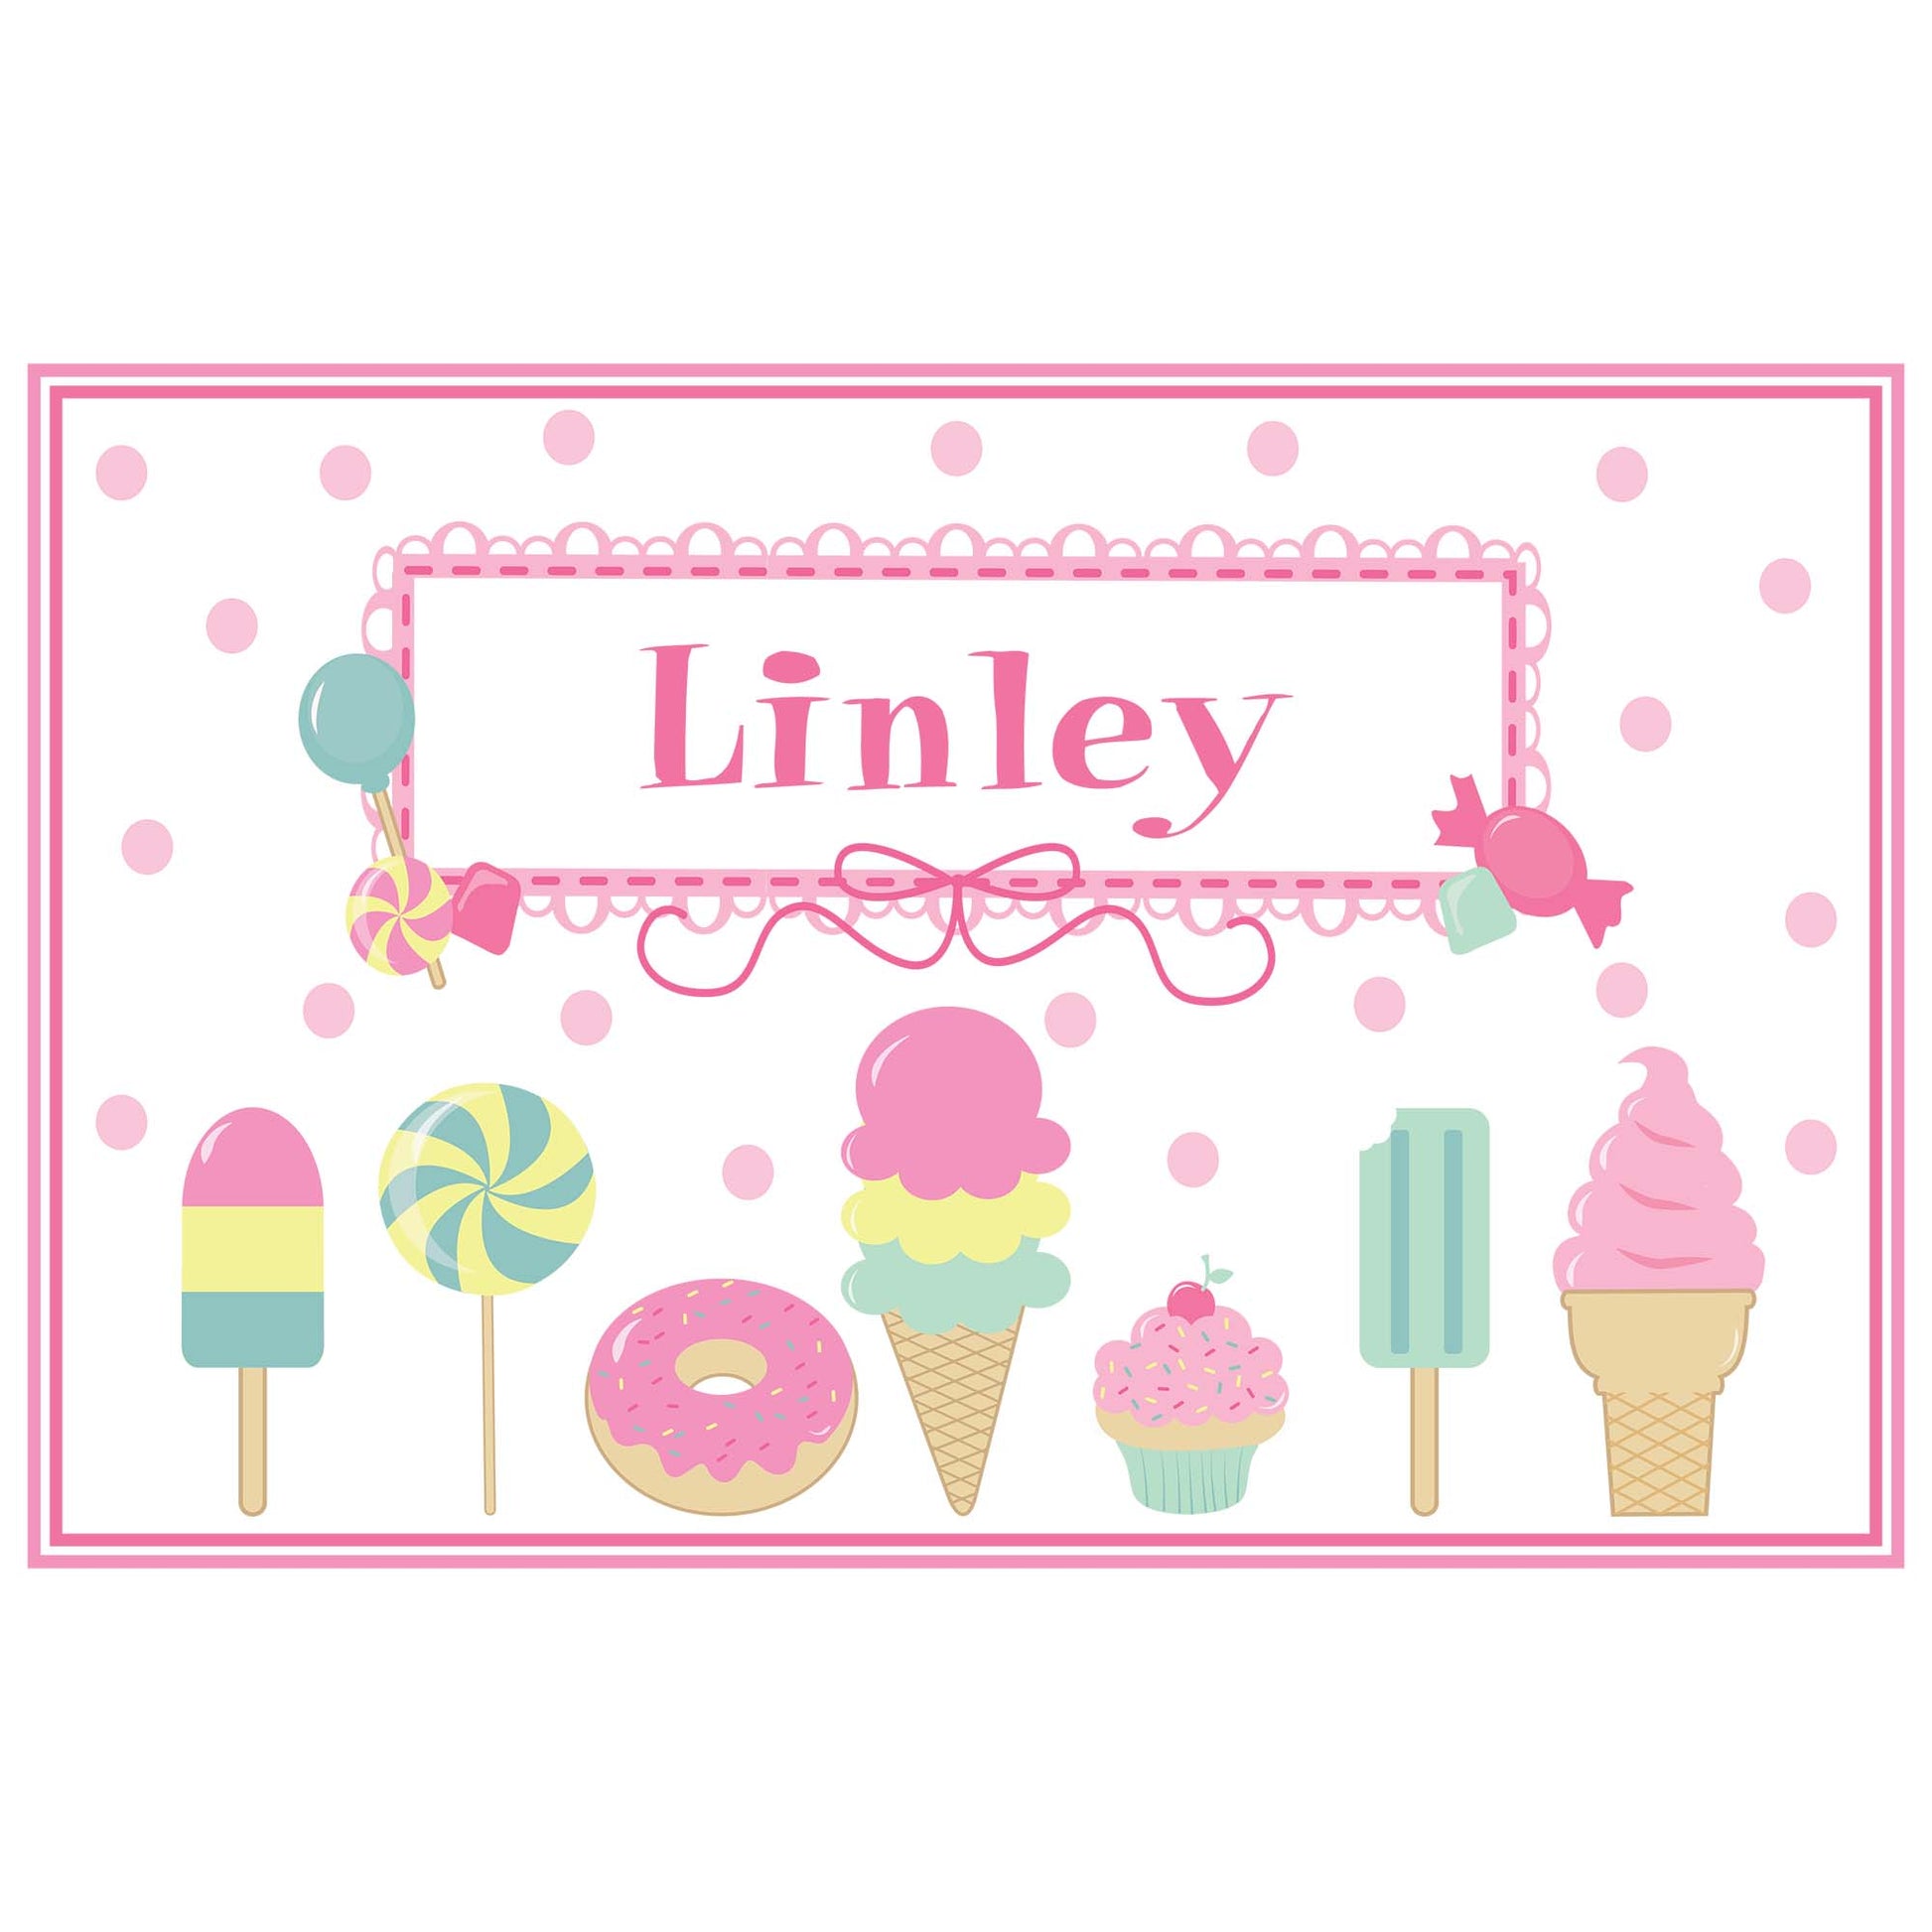 Personalized Placemat with Sweet Treats design